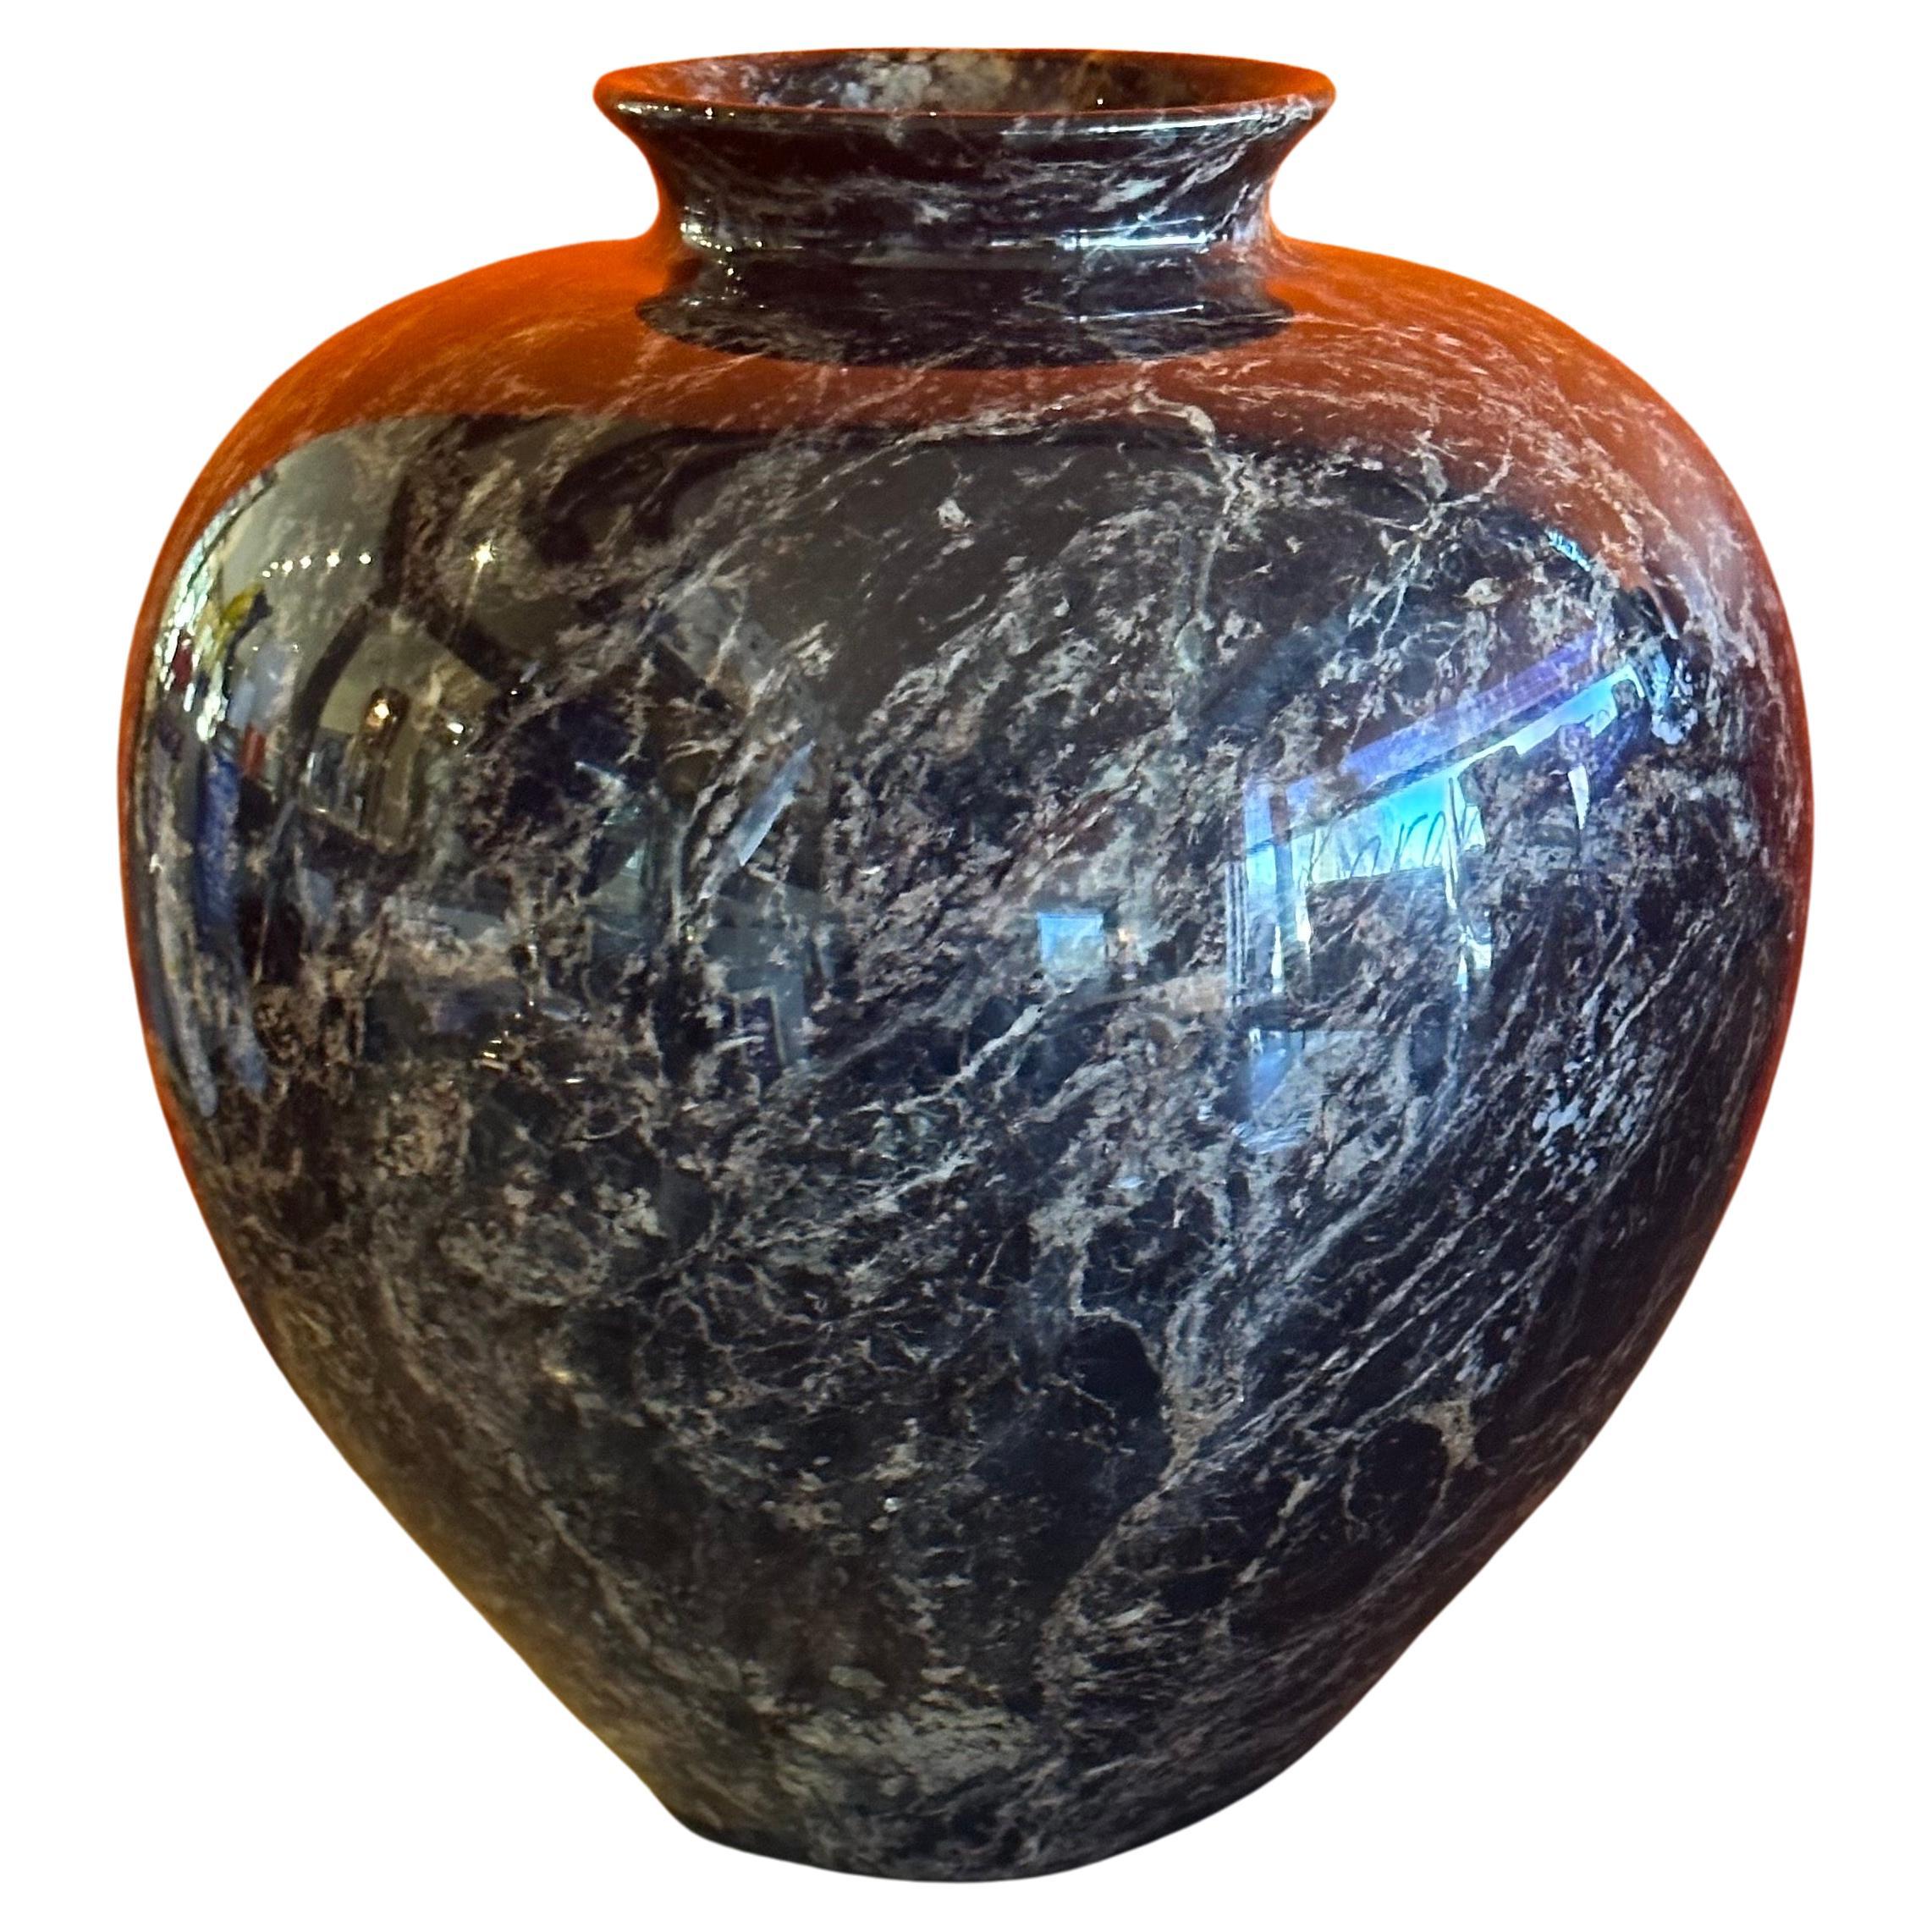 Massive post-modern Italian black marble vase, circa 1980s. The vase has a black background with tan, white and grey veining throughout.  The vase is in very good vintage condition with no chips or cracks and measures 12